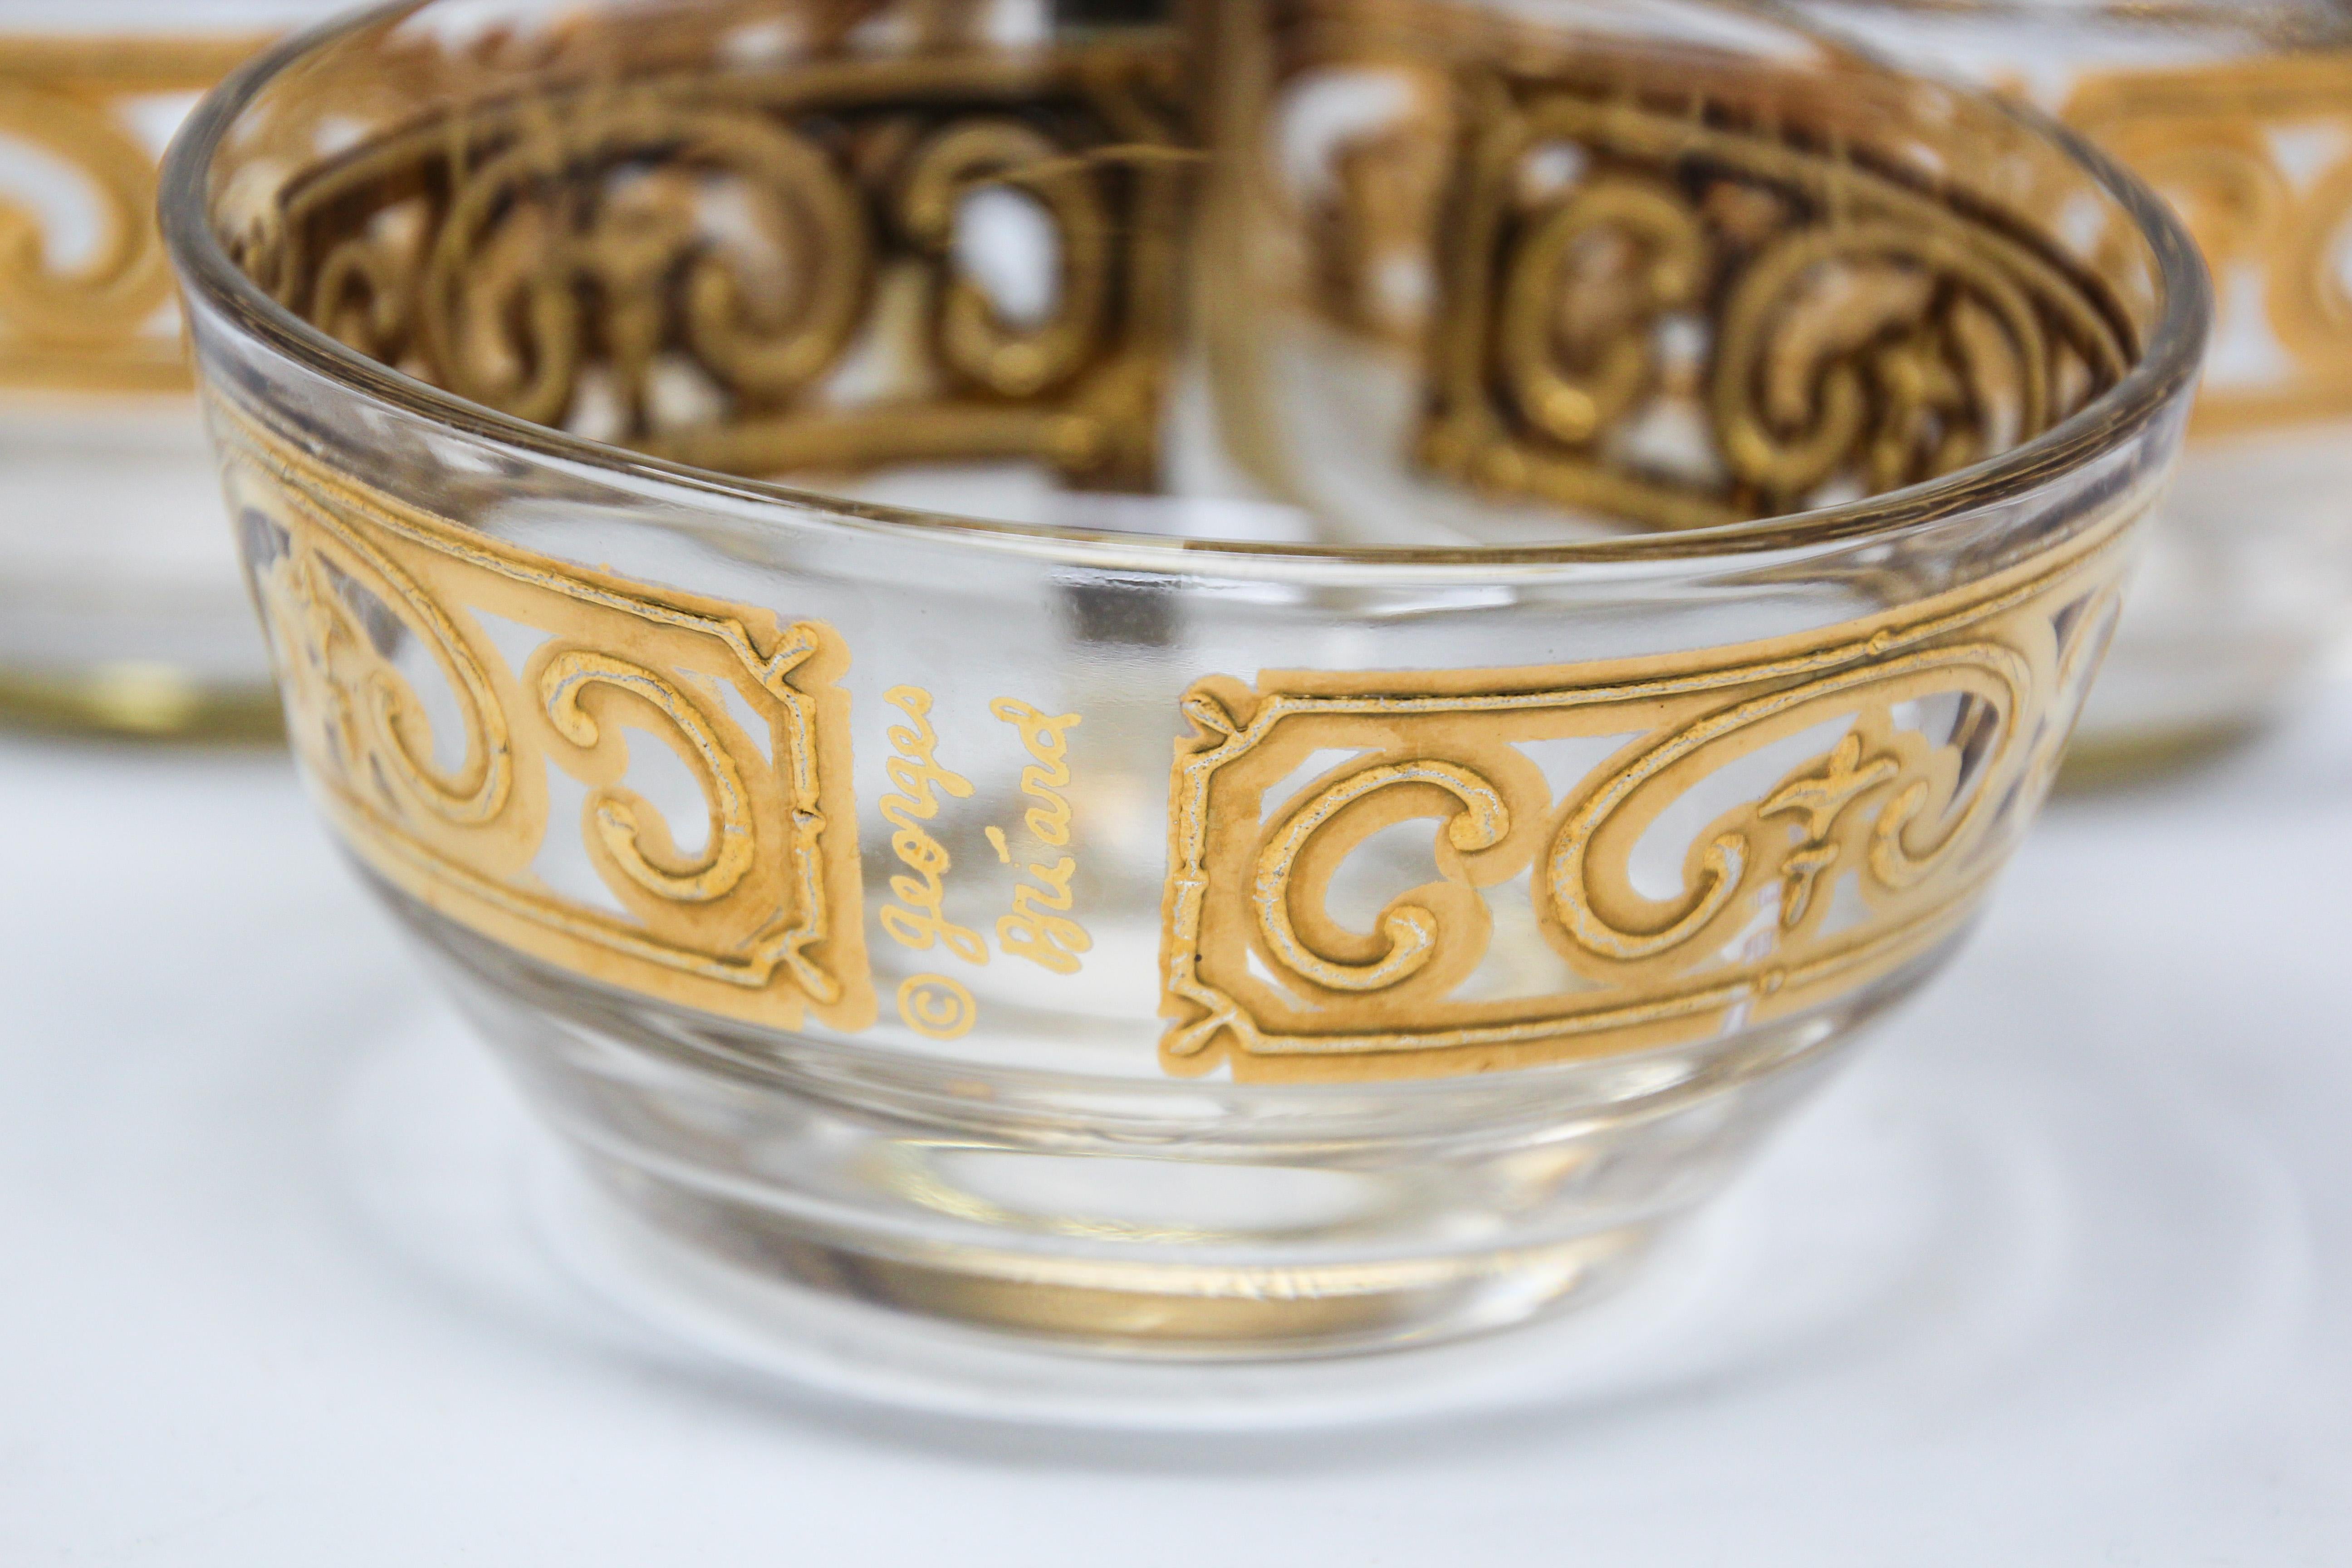 Exquisite Culver Valencia hostess appetizer or nut bowls.
Vintage midcentury hostess appetizer or nut bowls Culver Valencia 22-karat gold diamond
This set has a highly ornate 22-karat gold textured filigree design with raised green diamond